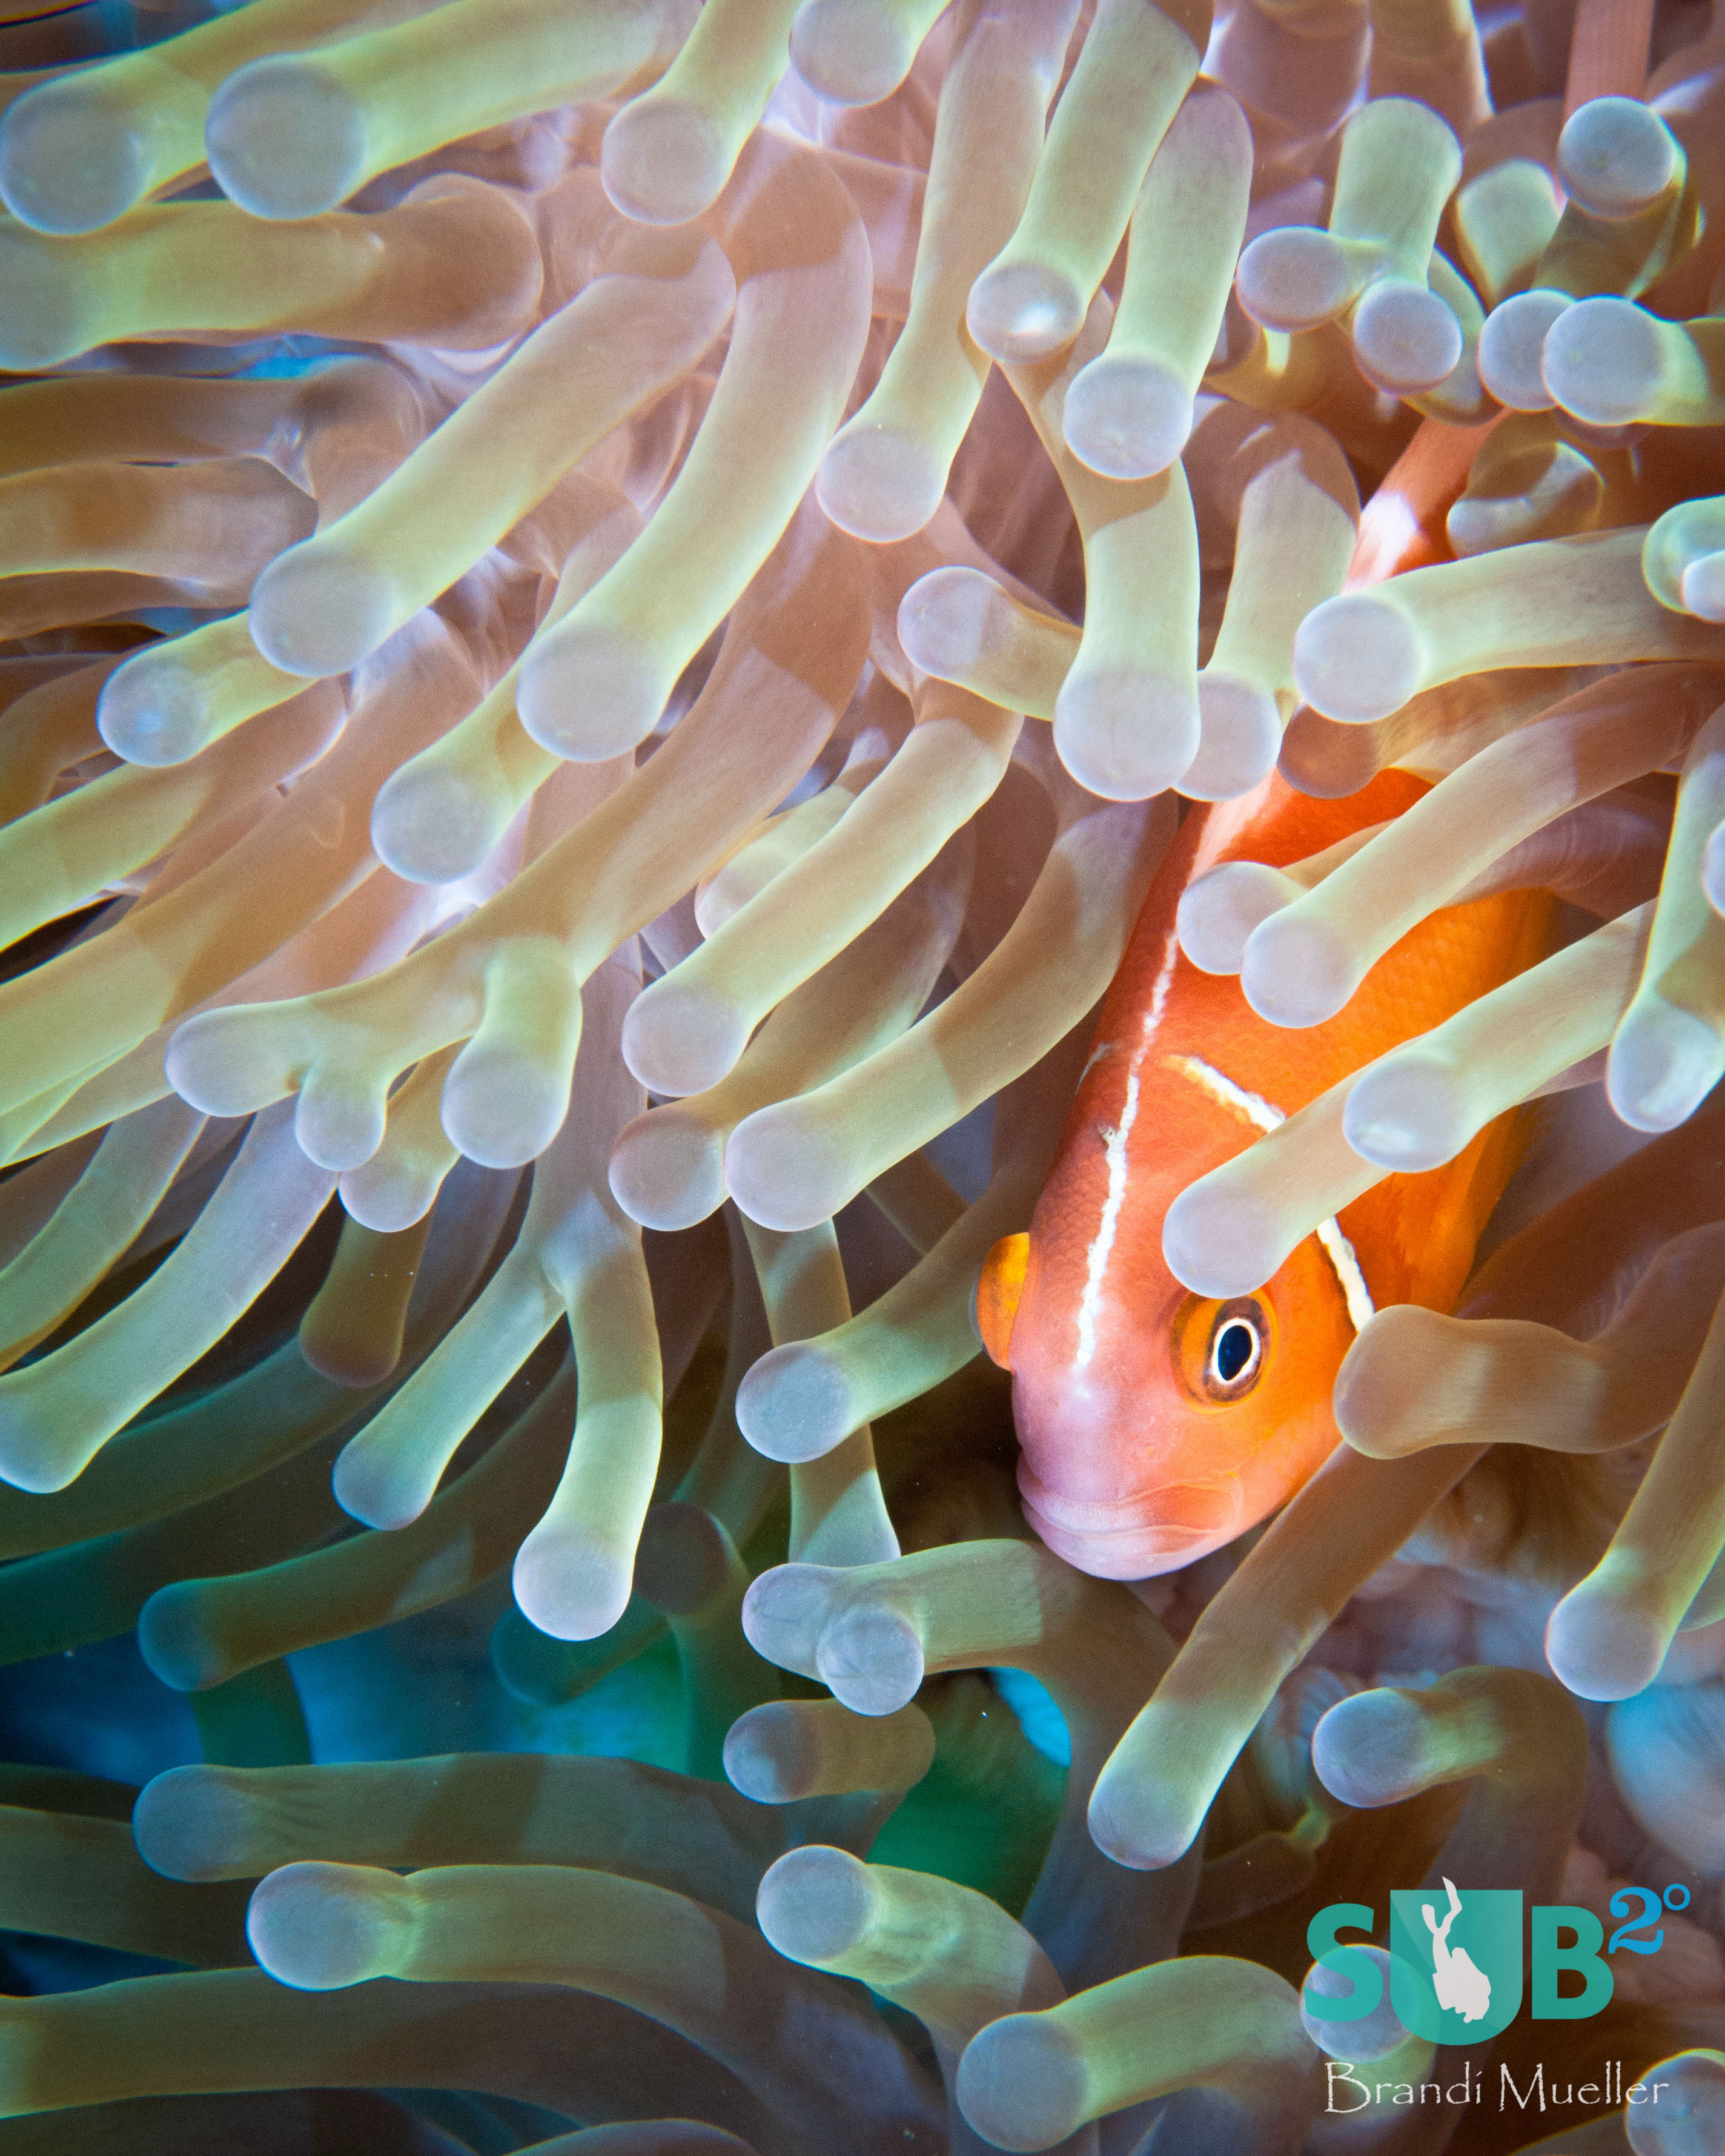 An anemone fish in its pastel anemone home.